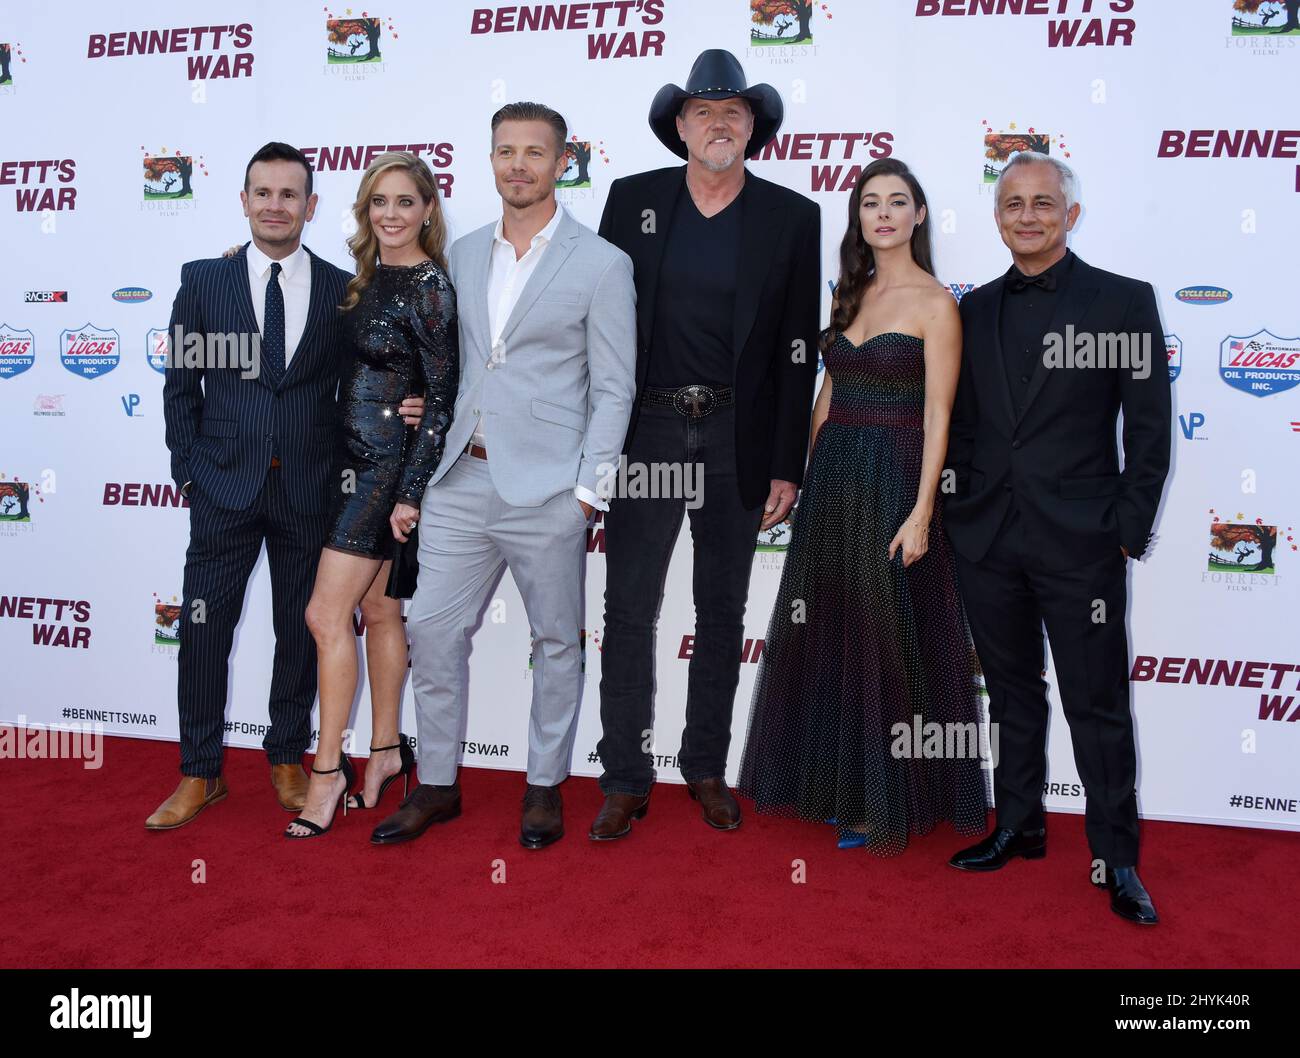 Alex Ranarivelo, Christina Moore, Michael Roark, Trace Adkins, Allison Paige and Ali Afshar at the premiere of 'Bennett's War' held at the Steven J. Ross Theater at Warner Bros. Studios Stock Photo